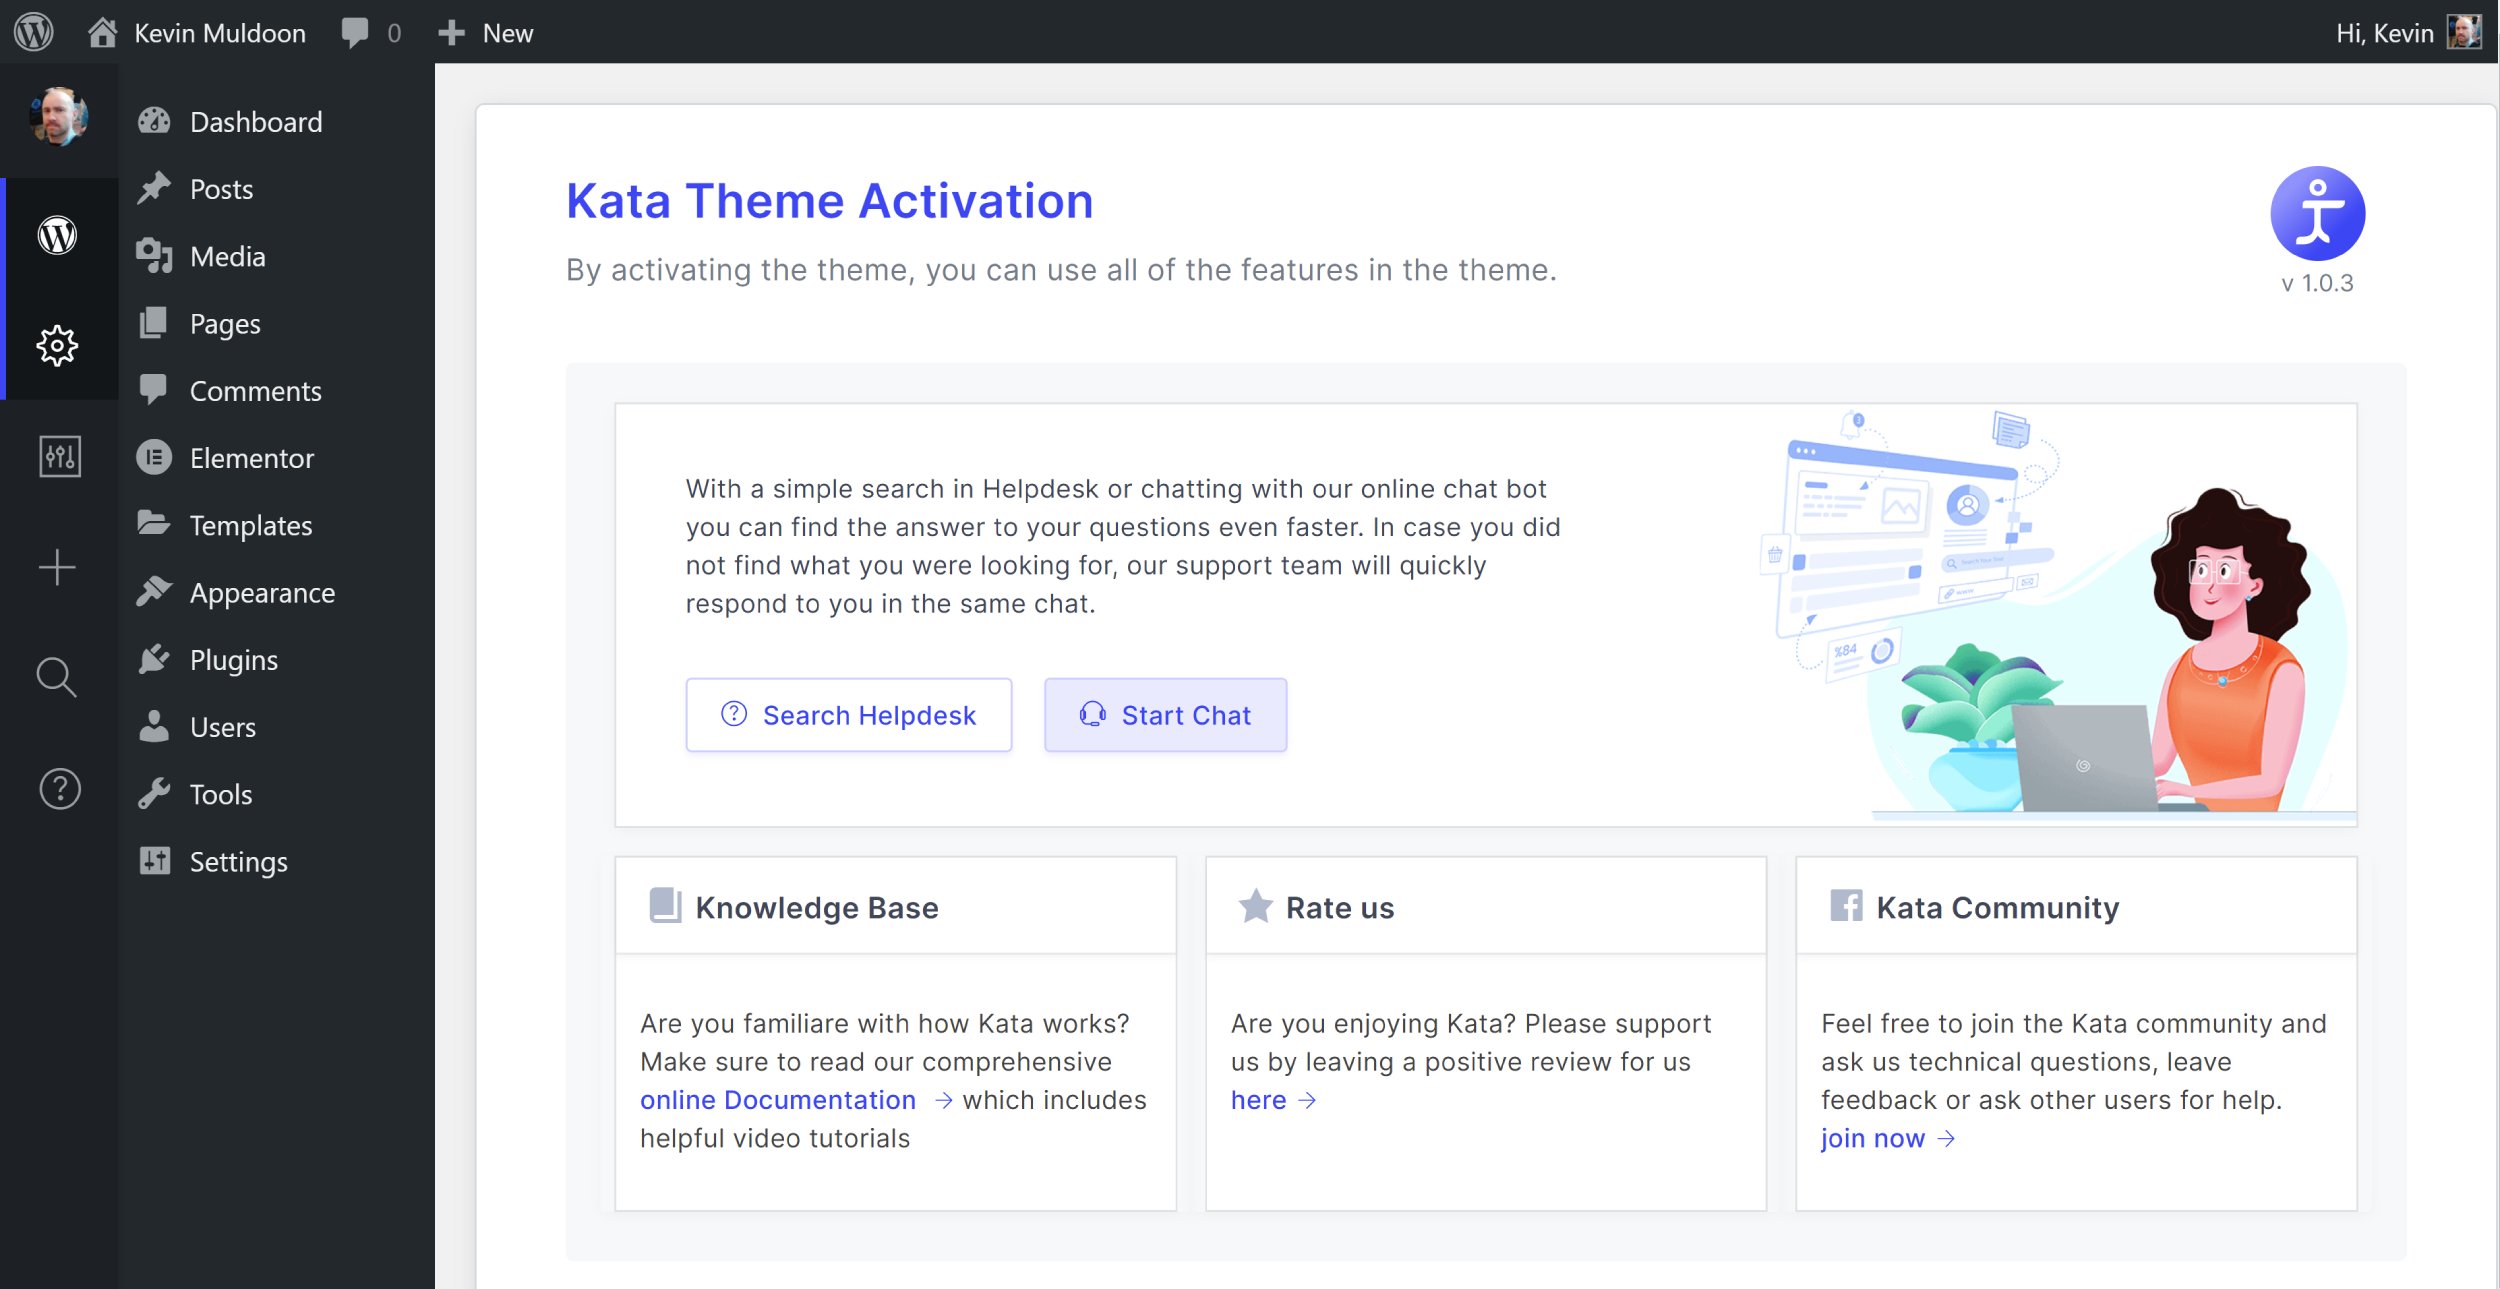 The Theme Activation Page